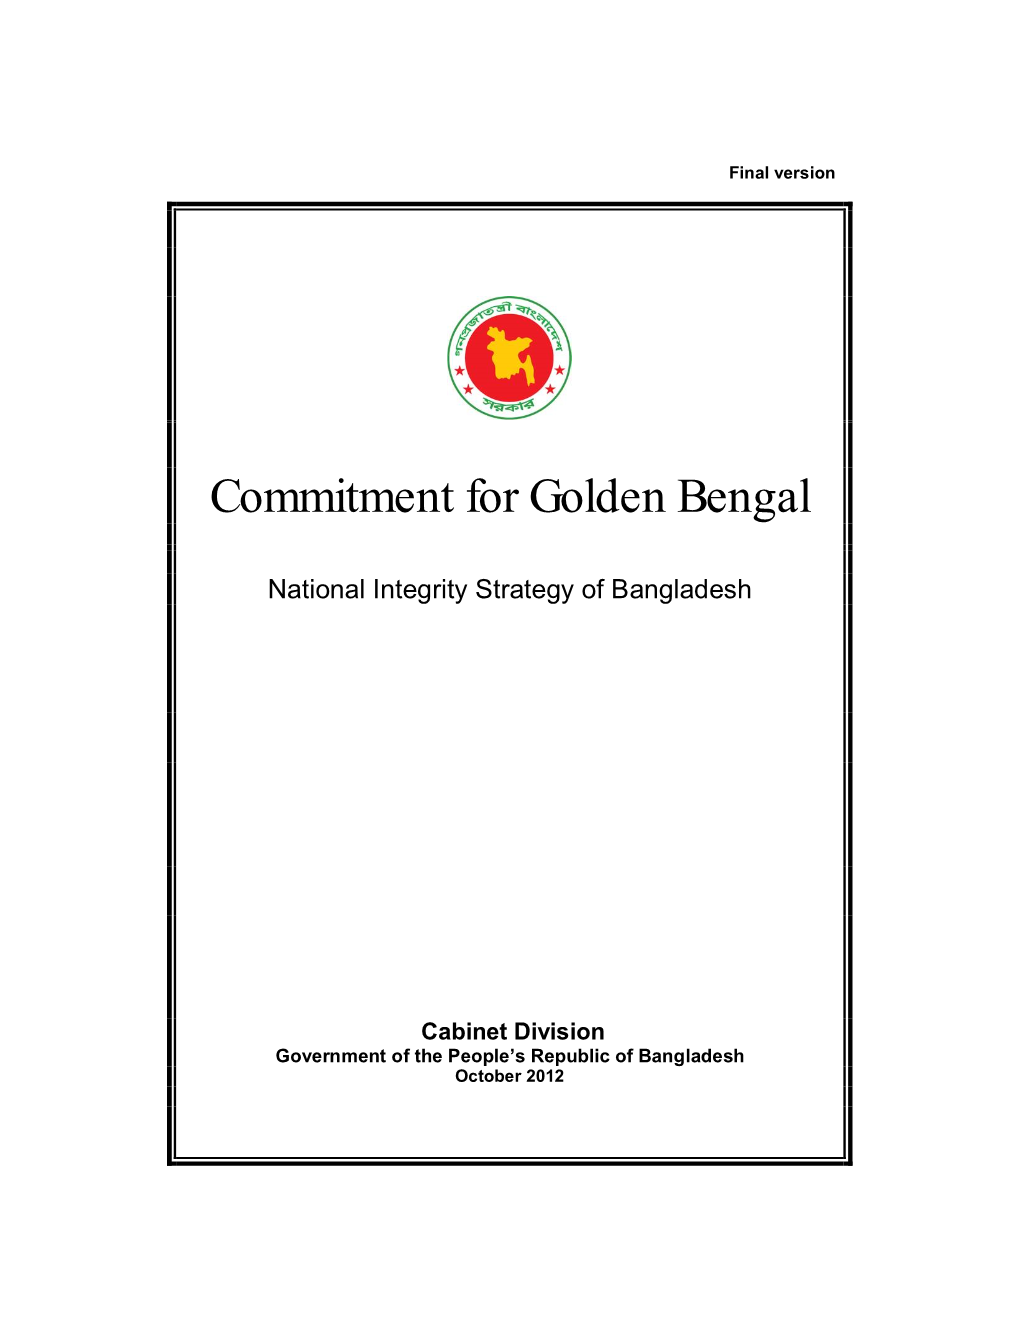 Commitment for Golden Bengal